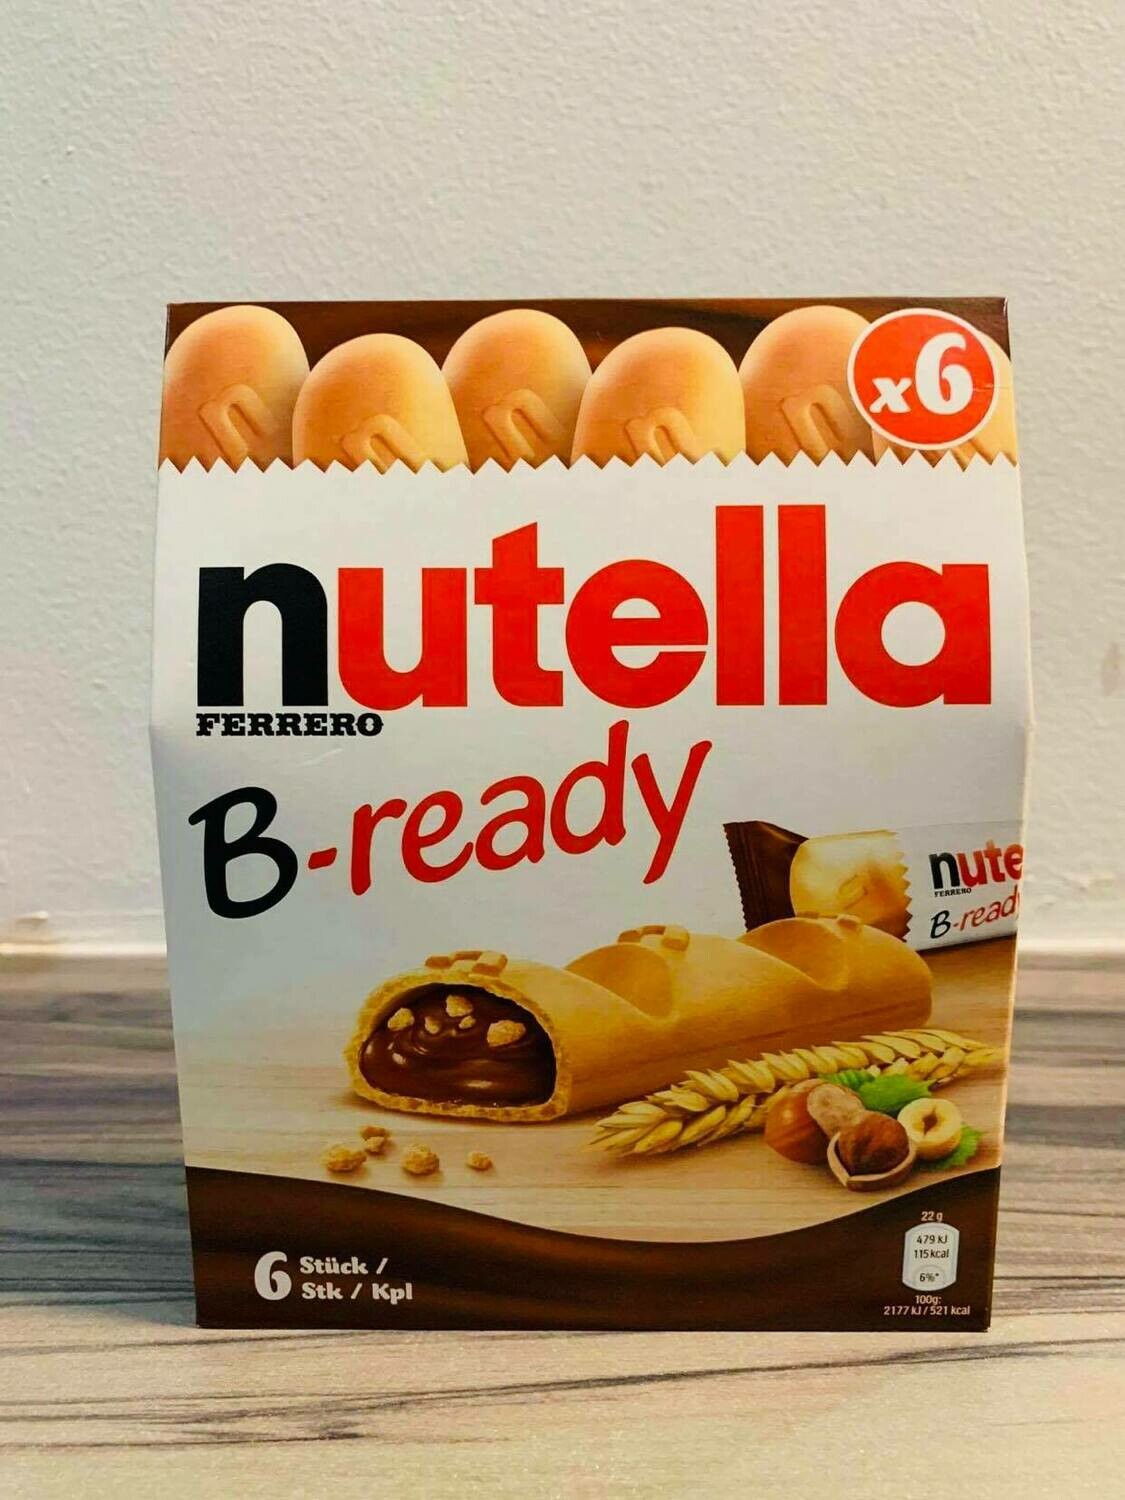 Nutella B-ready Ferrero Biscuits Filled x 6